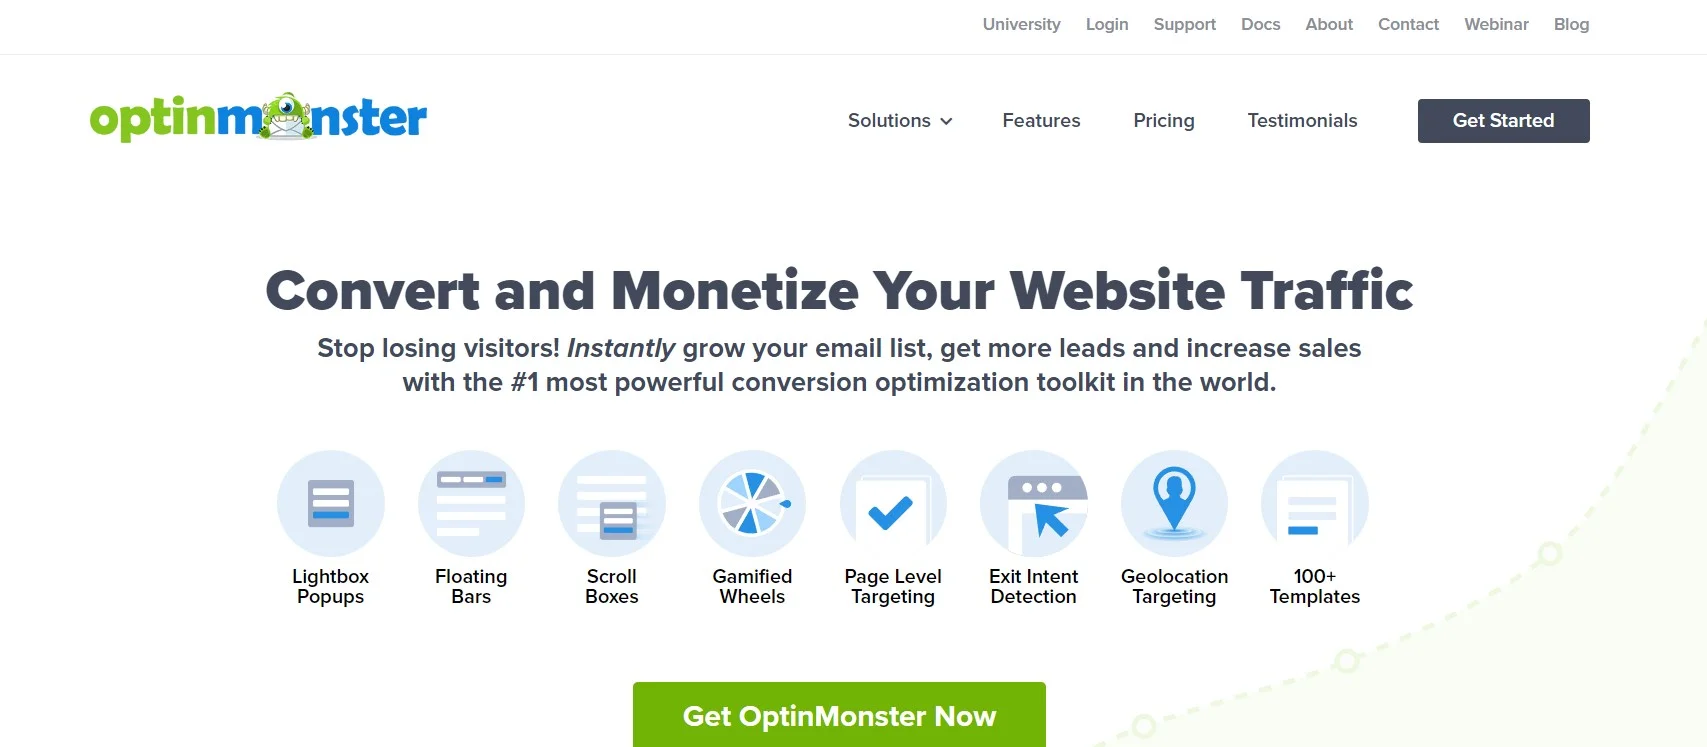 Optinmonster Is One Of The Best Tools To Increase Conversion Rate.webp